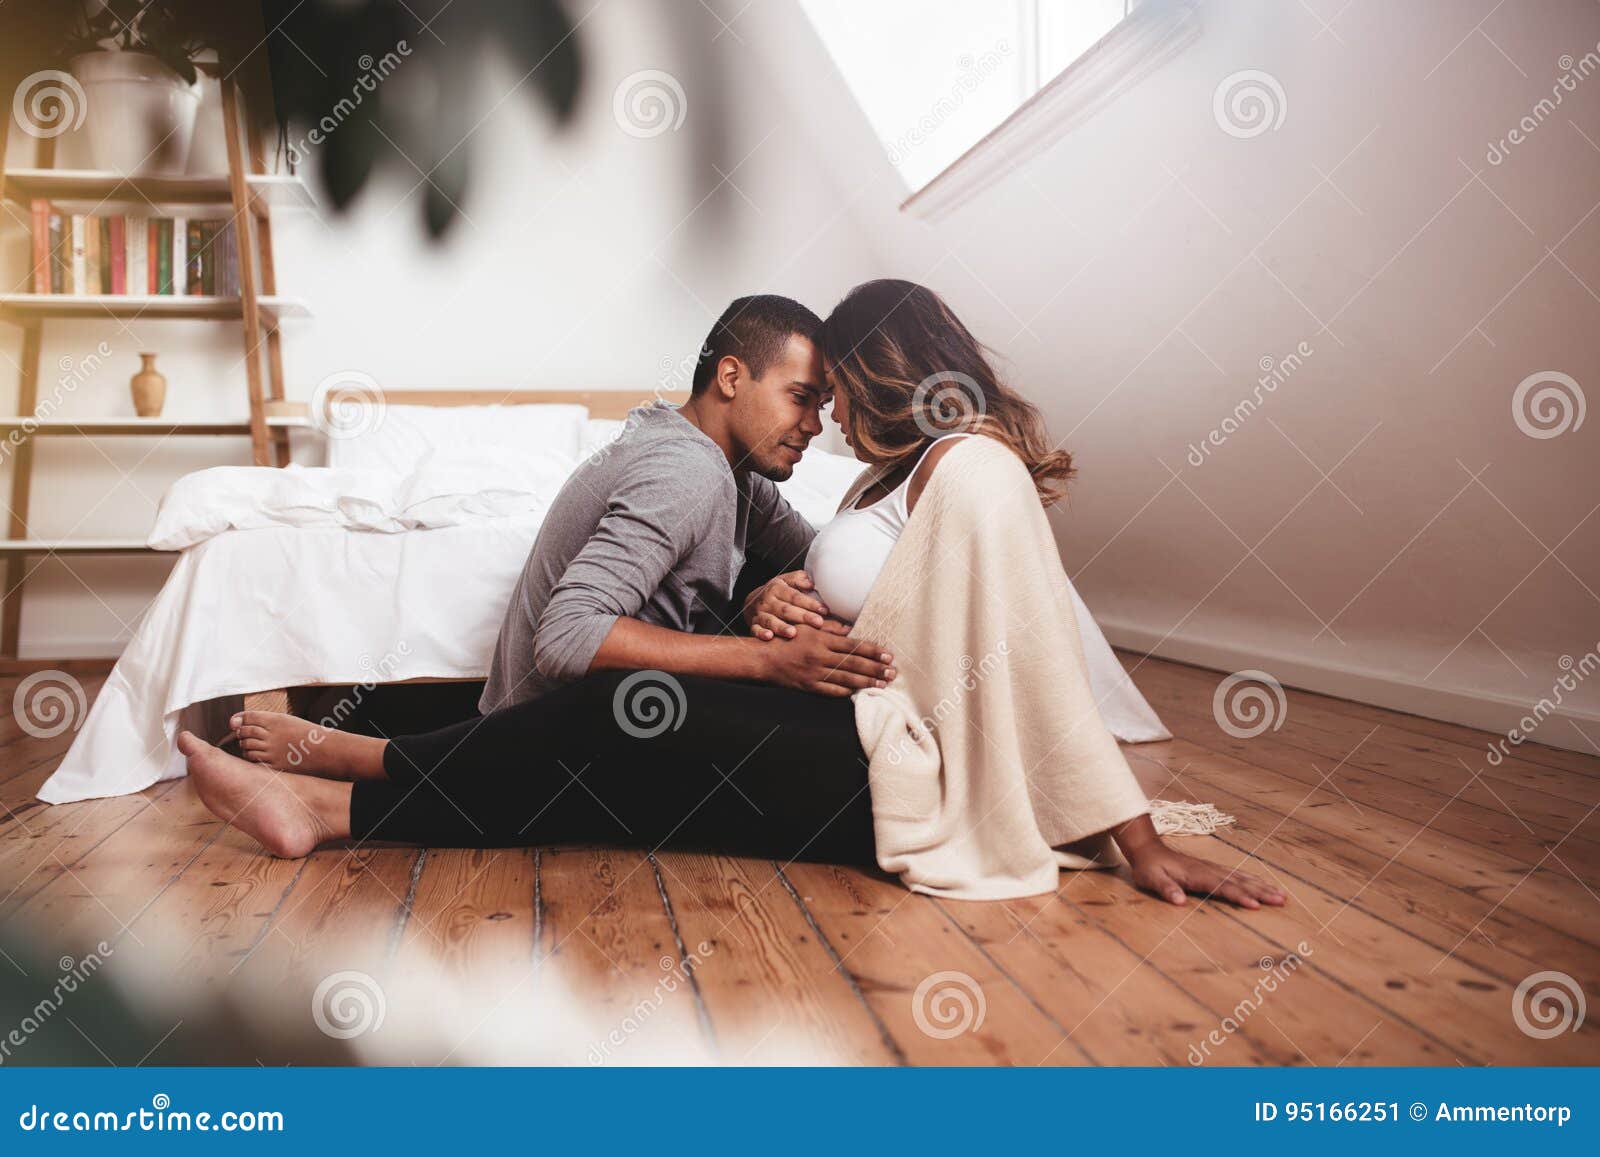 Romantic Pregnant Couple Sitting on the Floor Stock Image - Image ...